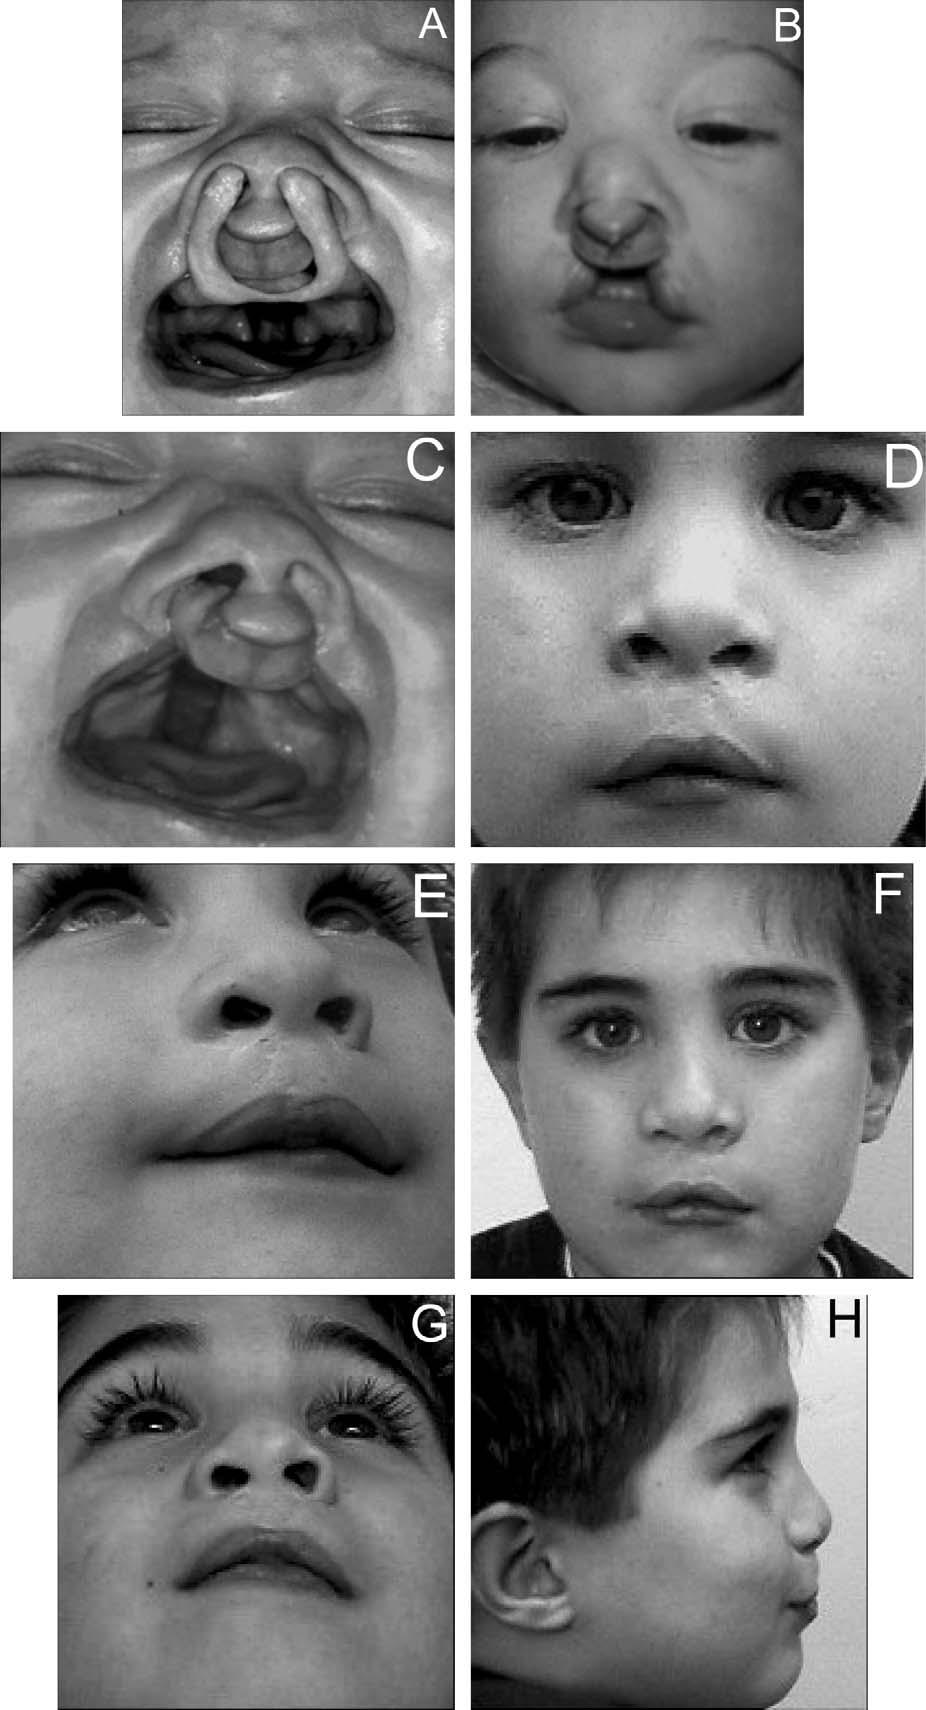 Bennun and Figueroa, DYNAMIC PRESURGICAL NASAL REMODELING 641 FIGURE 2 Patient with complete bilateral cleft lip and palate. A: Undergoing bilateral nasal remodeling with the original appliance.